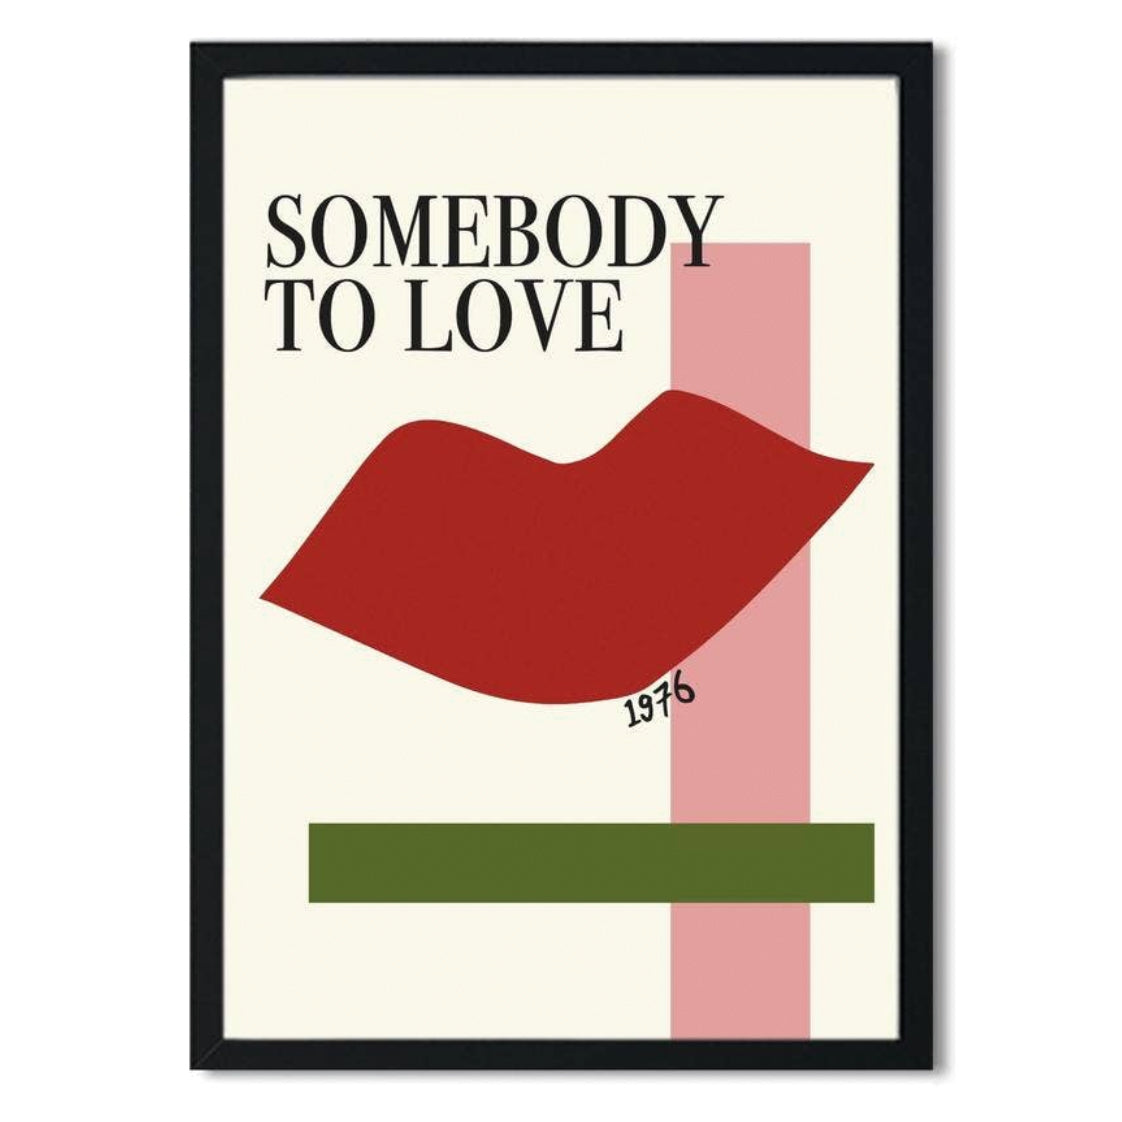 Fan Club Somebody to Love Queen Inspired Retro Giclée Art Print